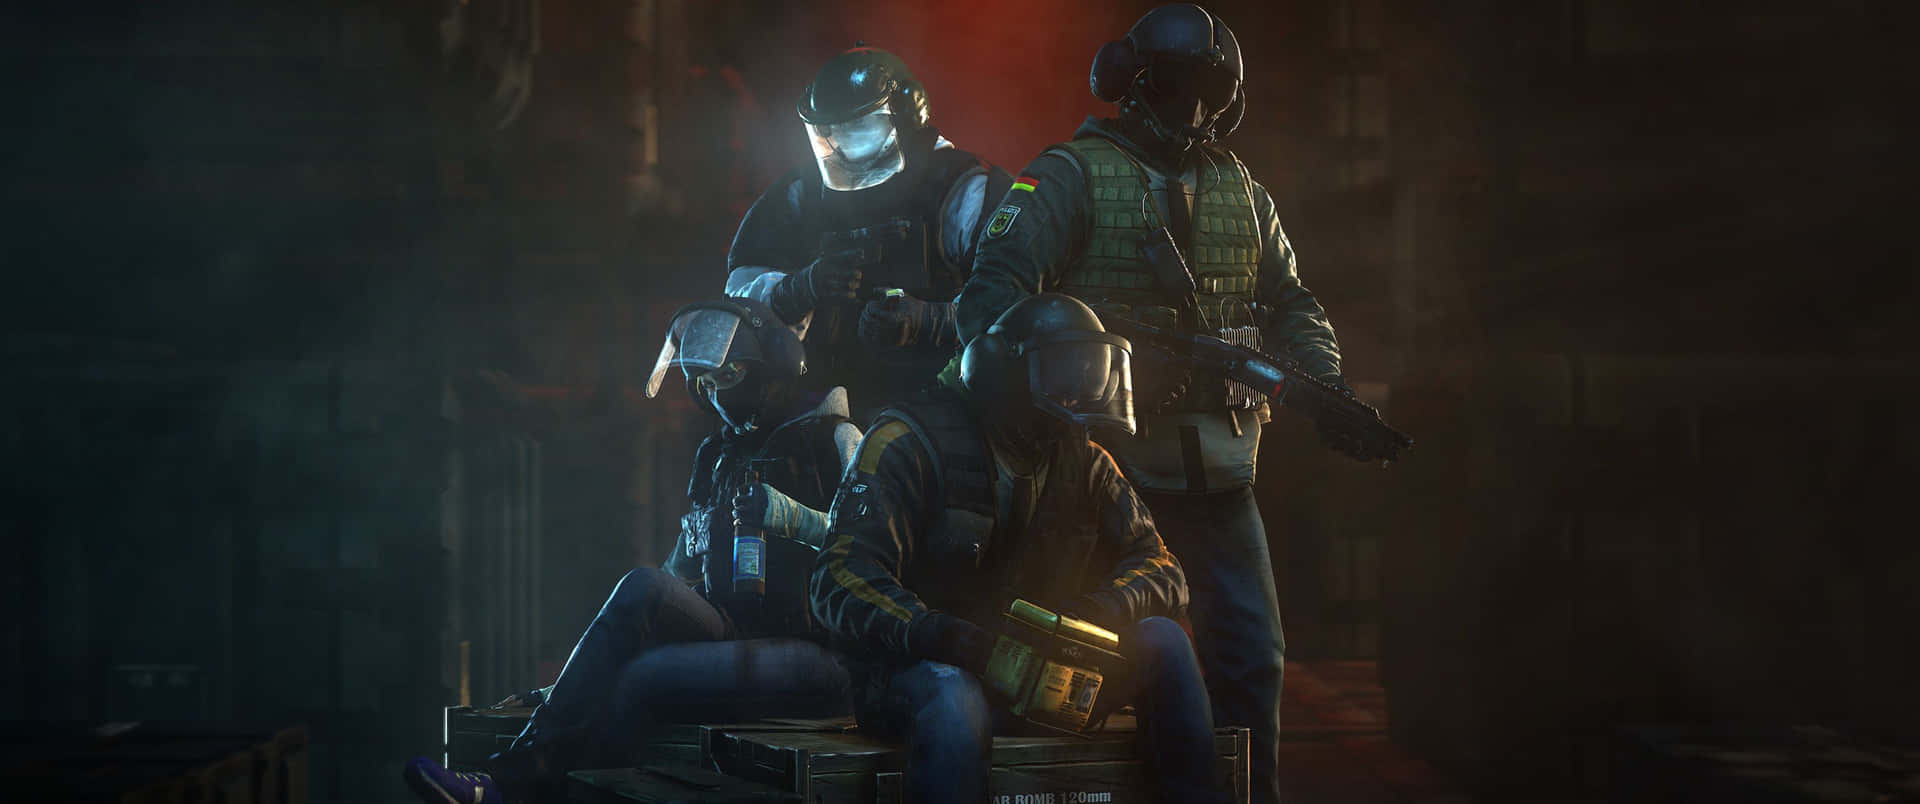 Ready for Battle: Preparing for a Match in Rainbow Six Siege